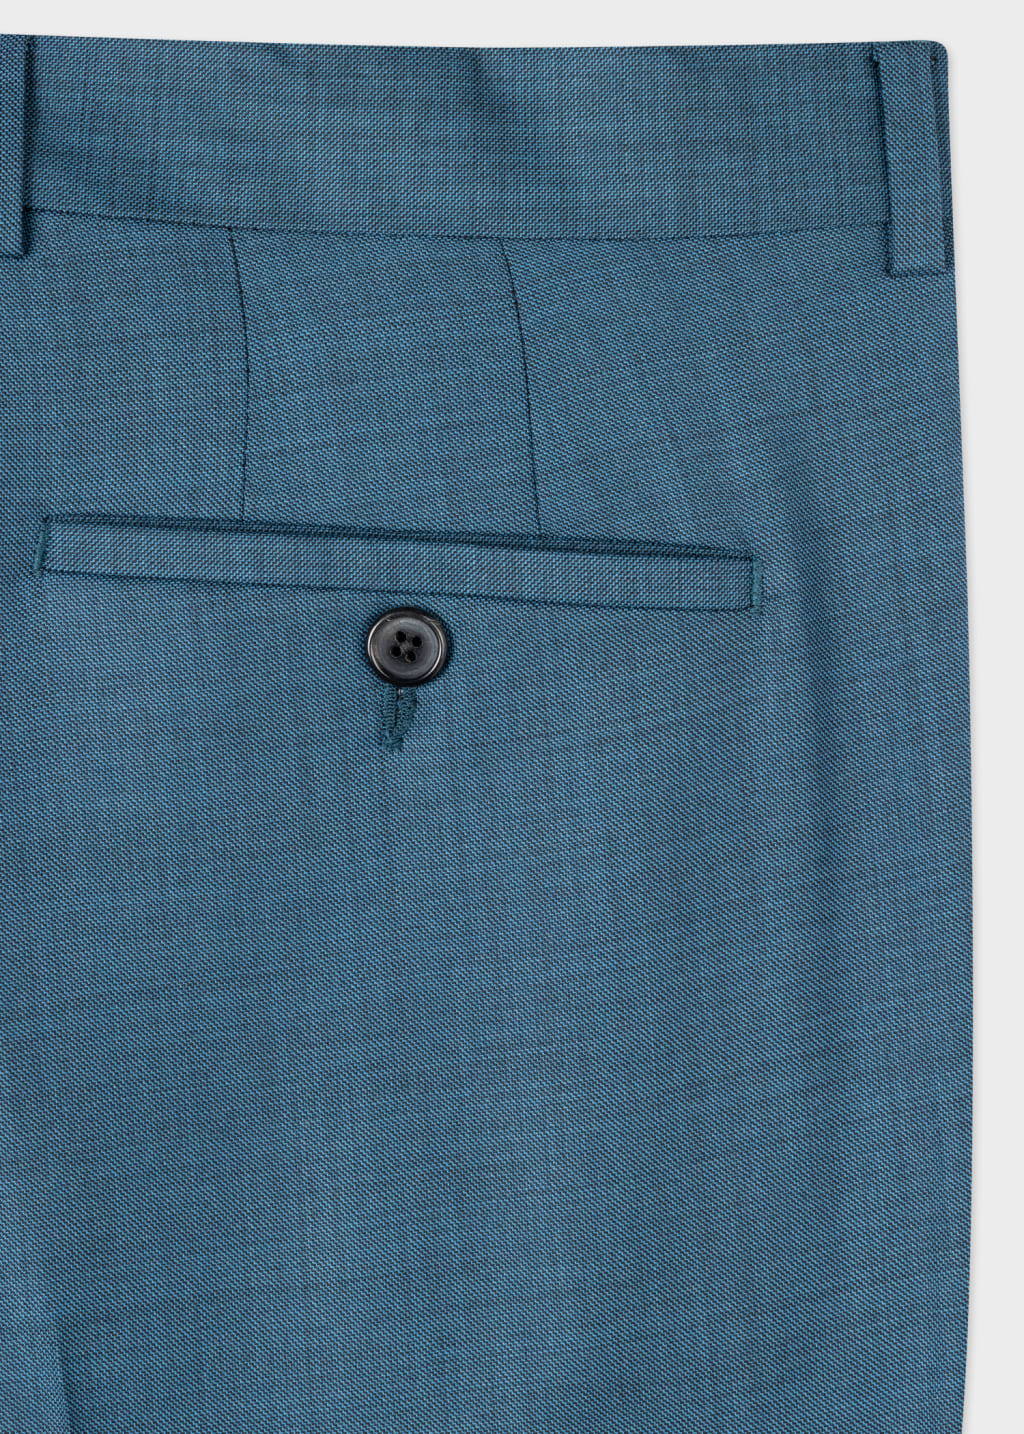 The Soho - Tailored-Fit Teal Sharkskin Wool Suit